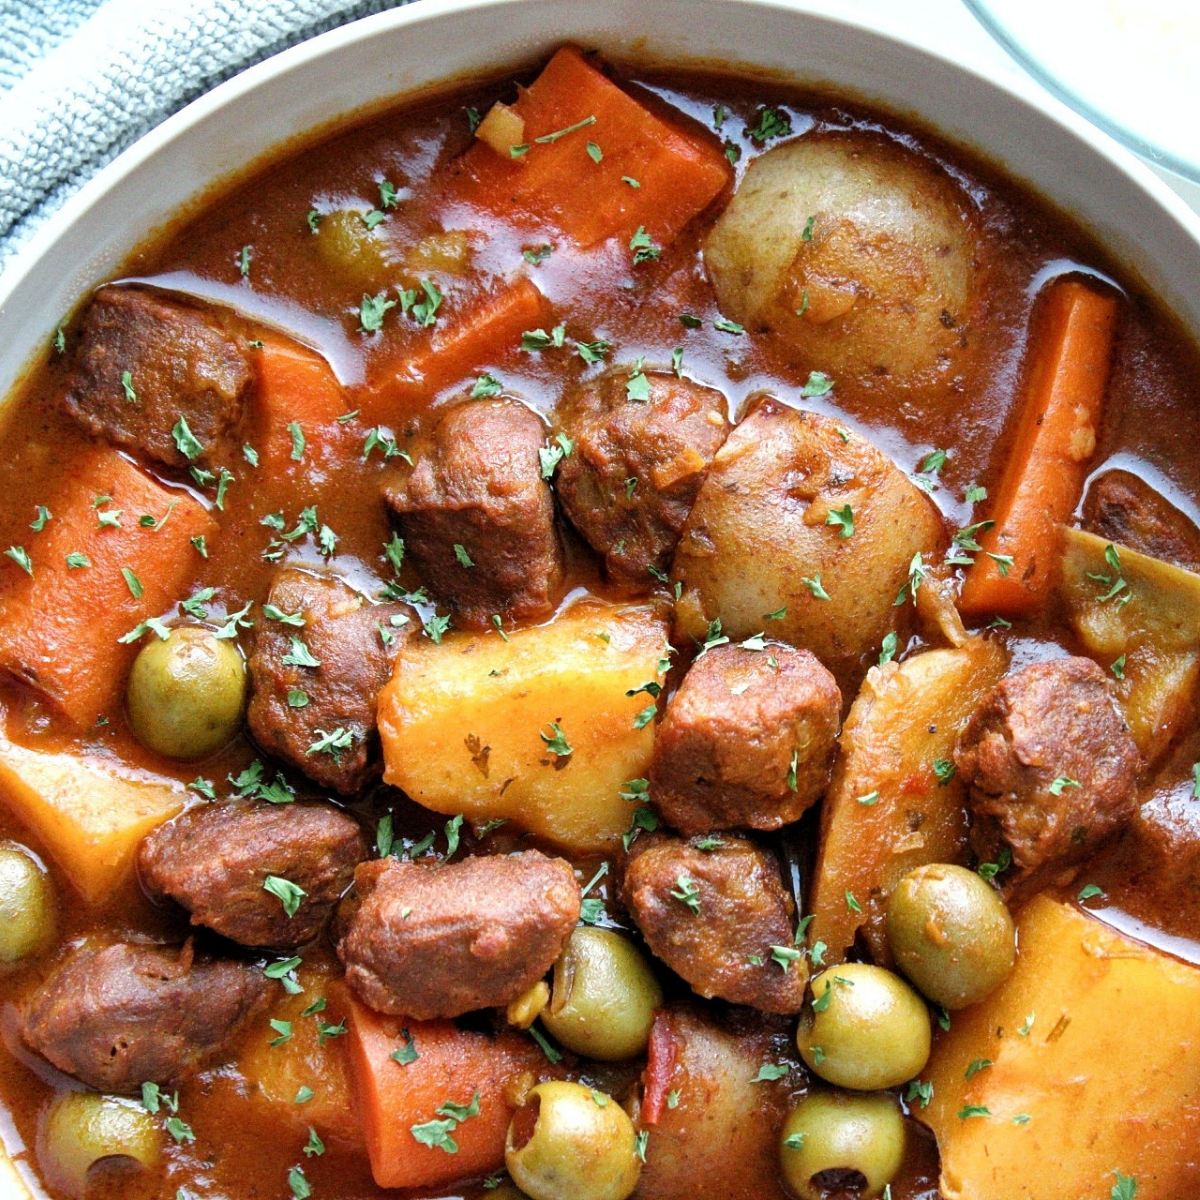 Vegetarian beef stew with chunks of potatoes, carrots, vegan beef, green olives in a gray bowl